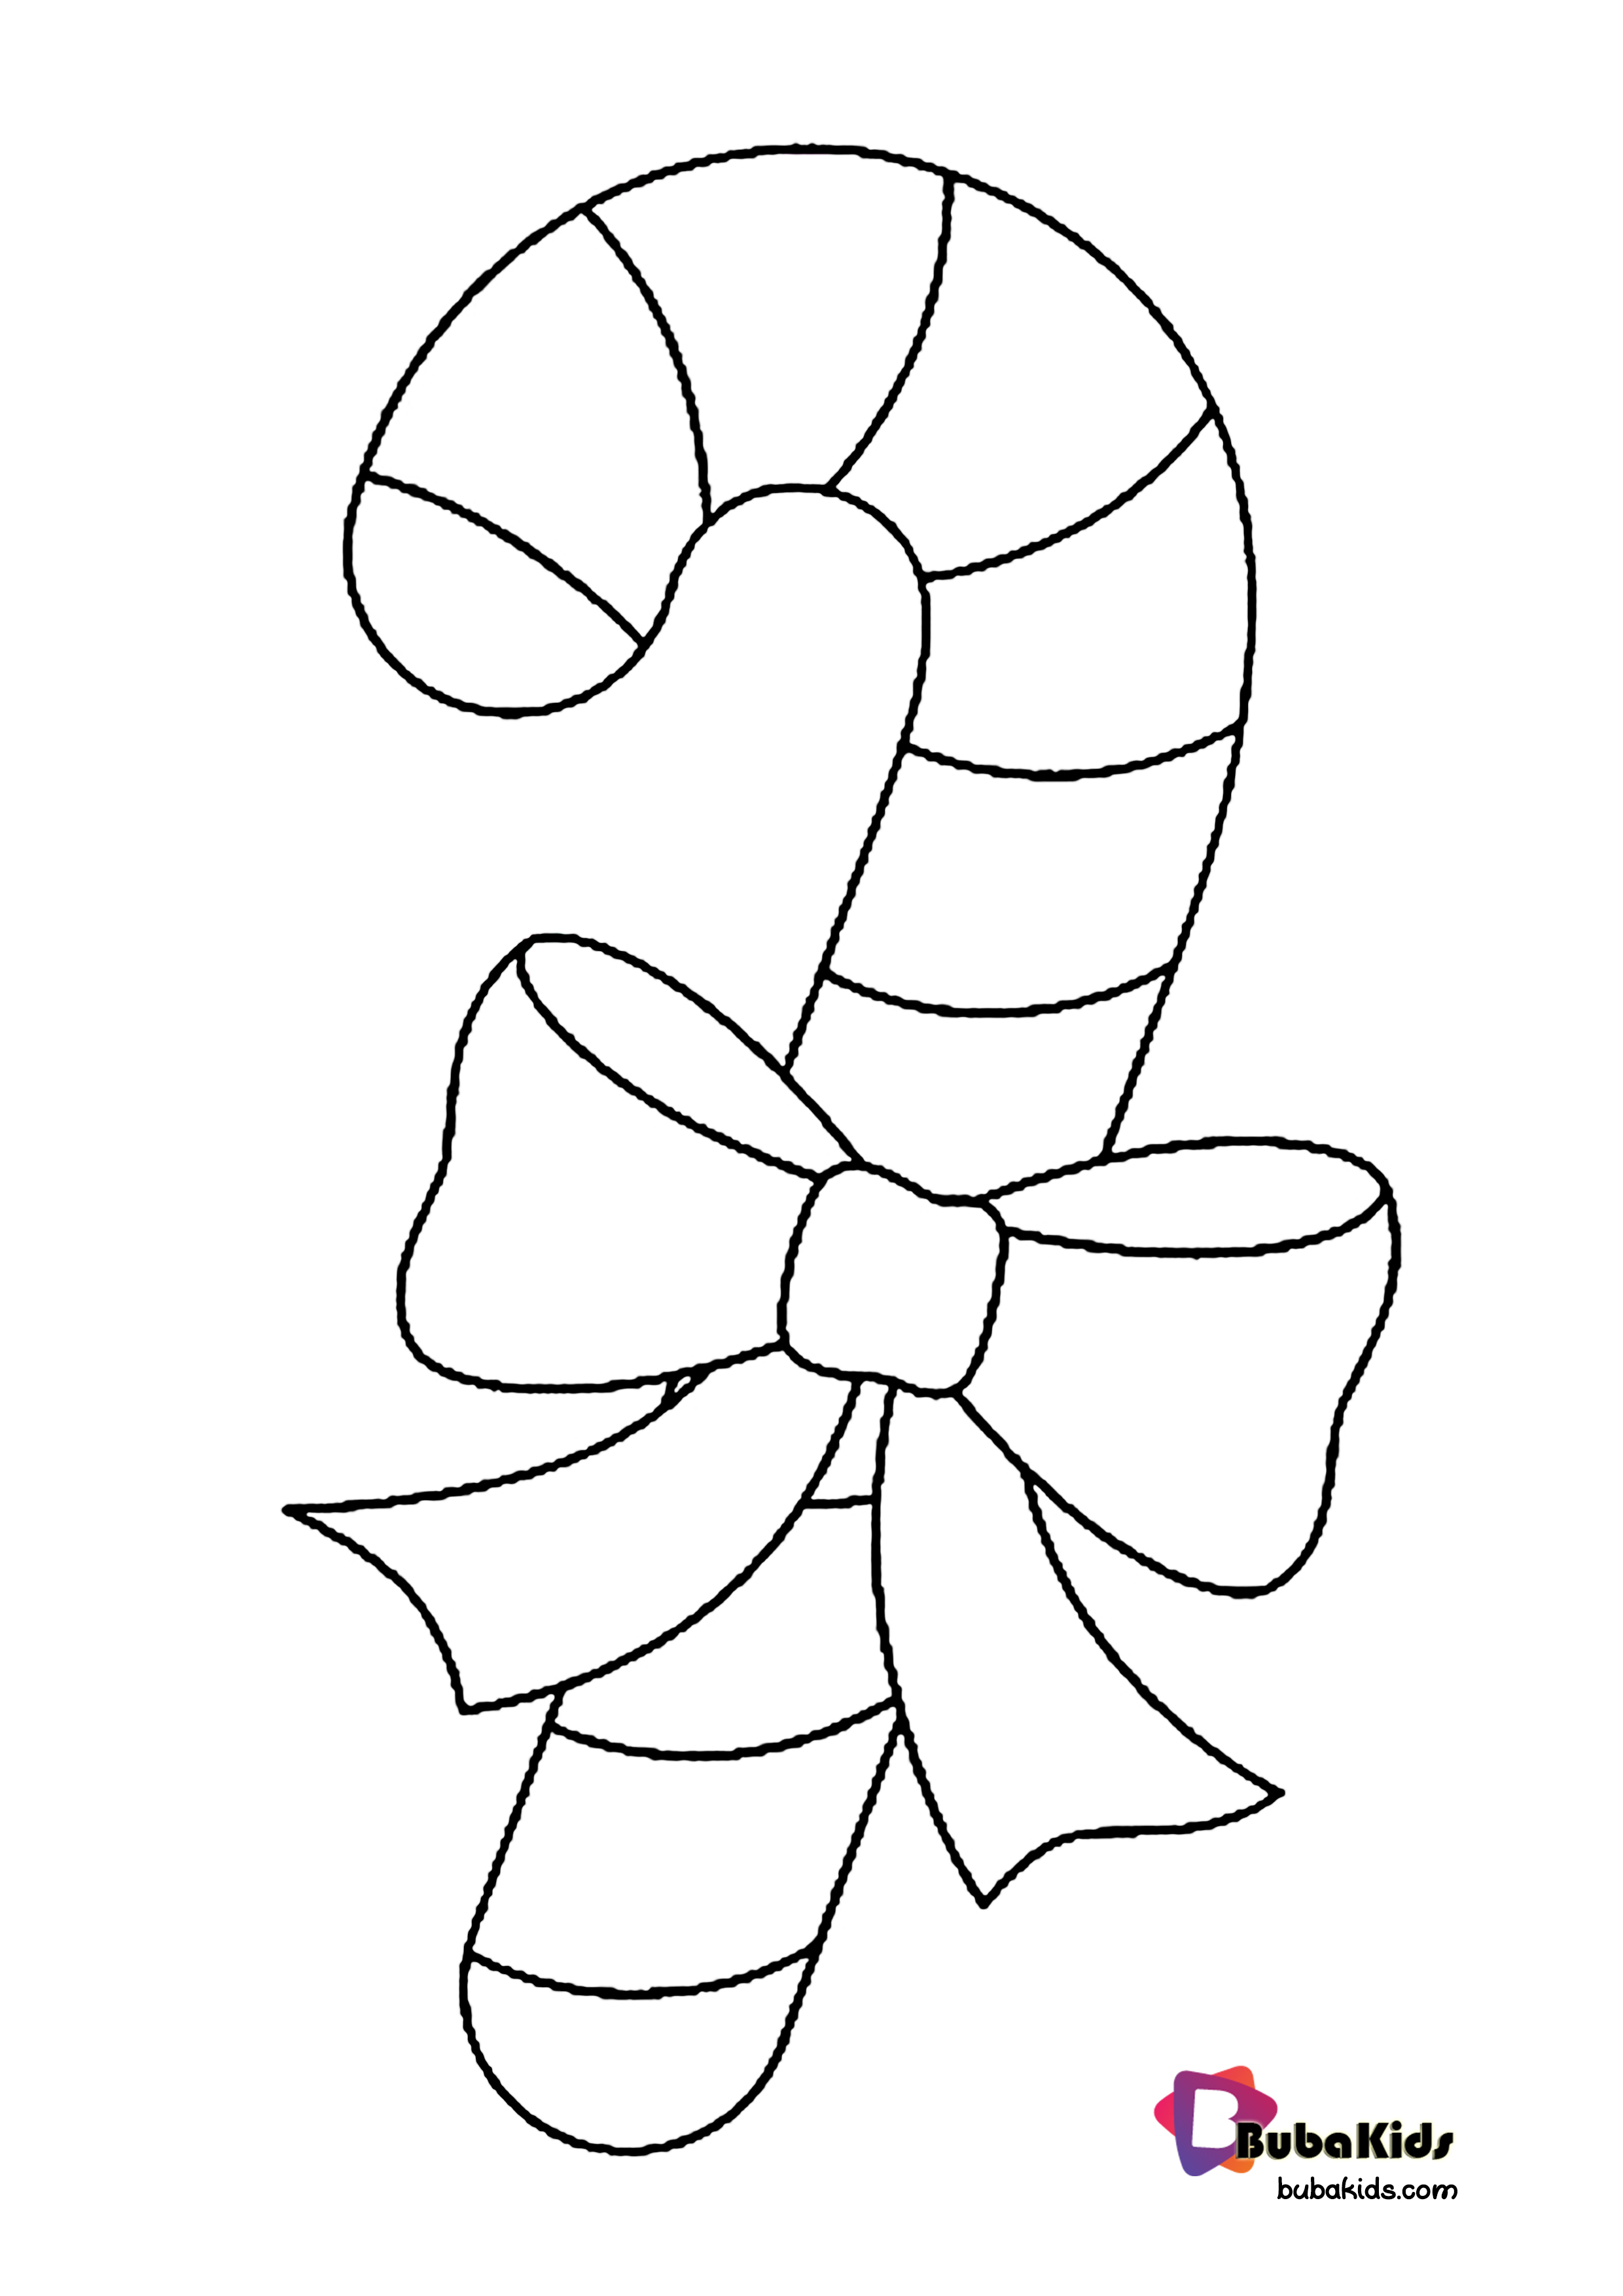 Christmas Ornament Coloring Page Wallpaper